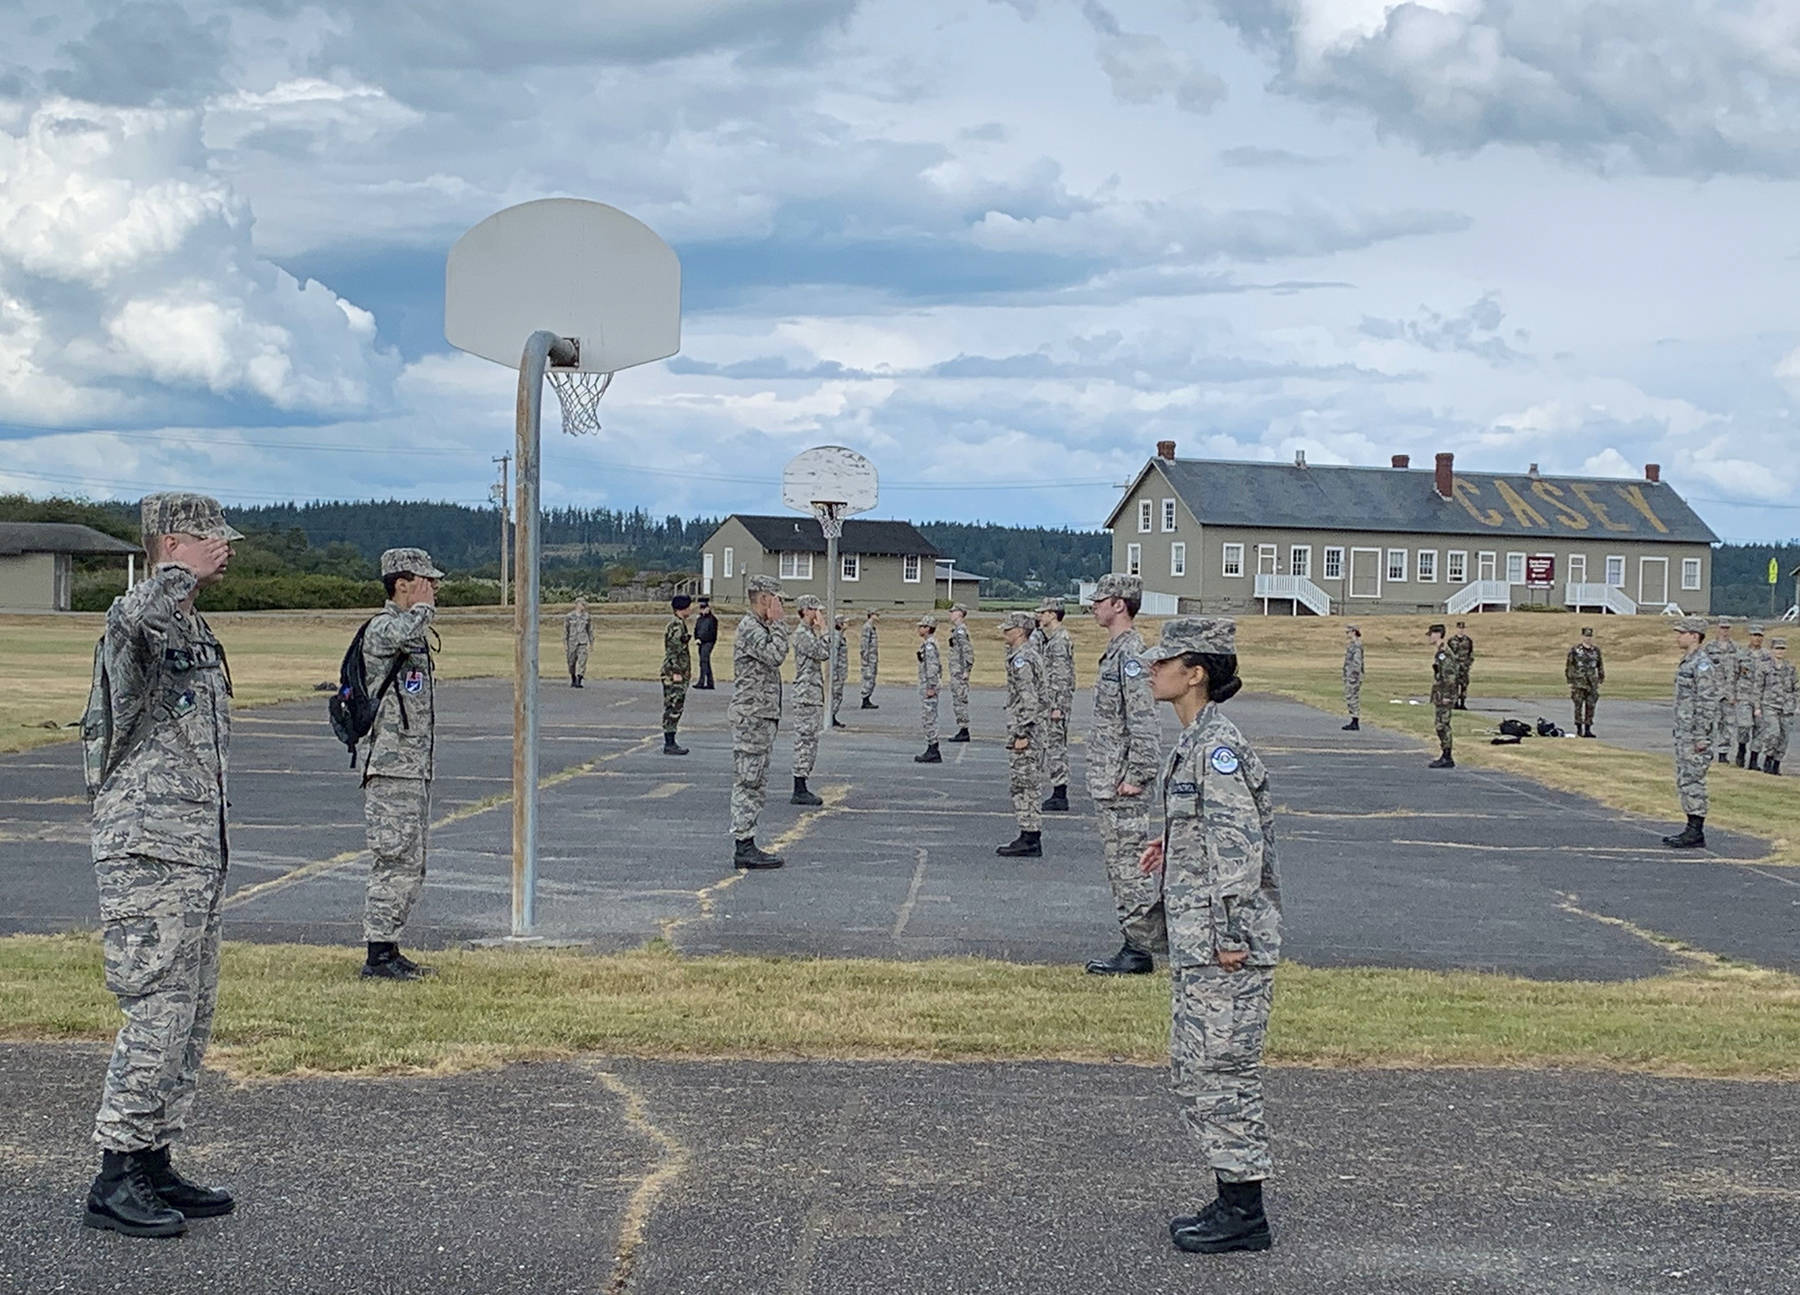 The cadet cadre of Cascade Falcon XXIV practiced military formations as they prepared for the arrival of students June 30. (CAP Photo by Lt Col Tim Kelley, Cascade Falcon XXIV Public Affairs Officer)